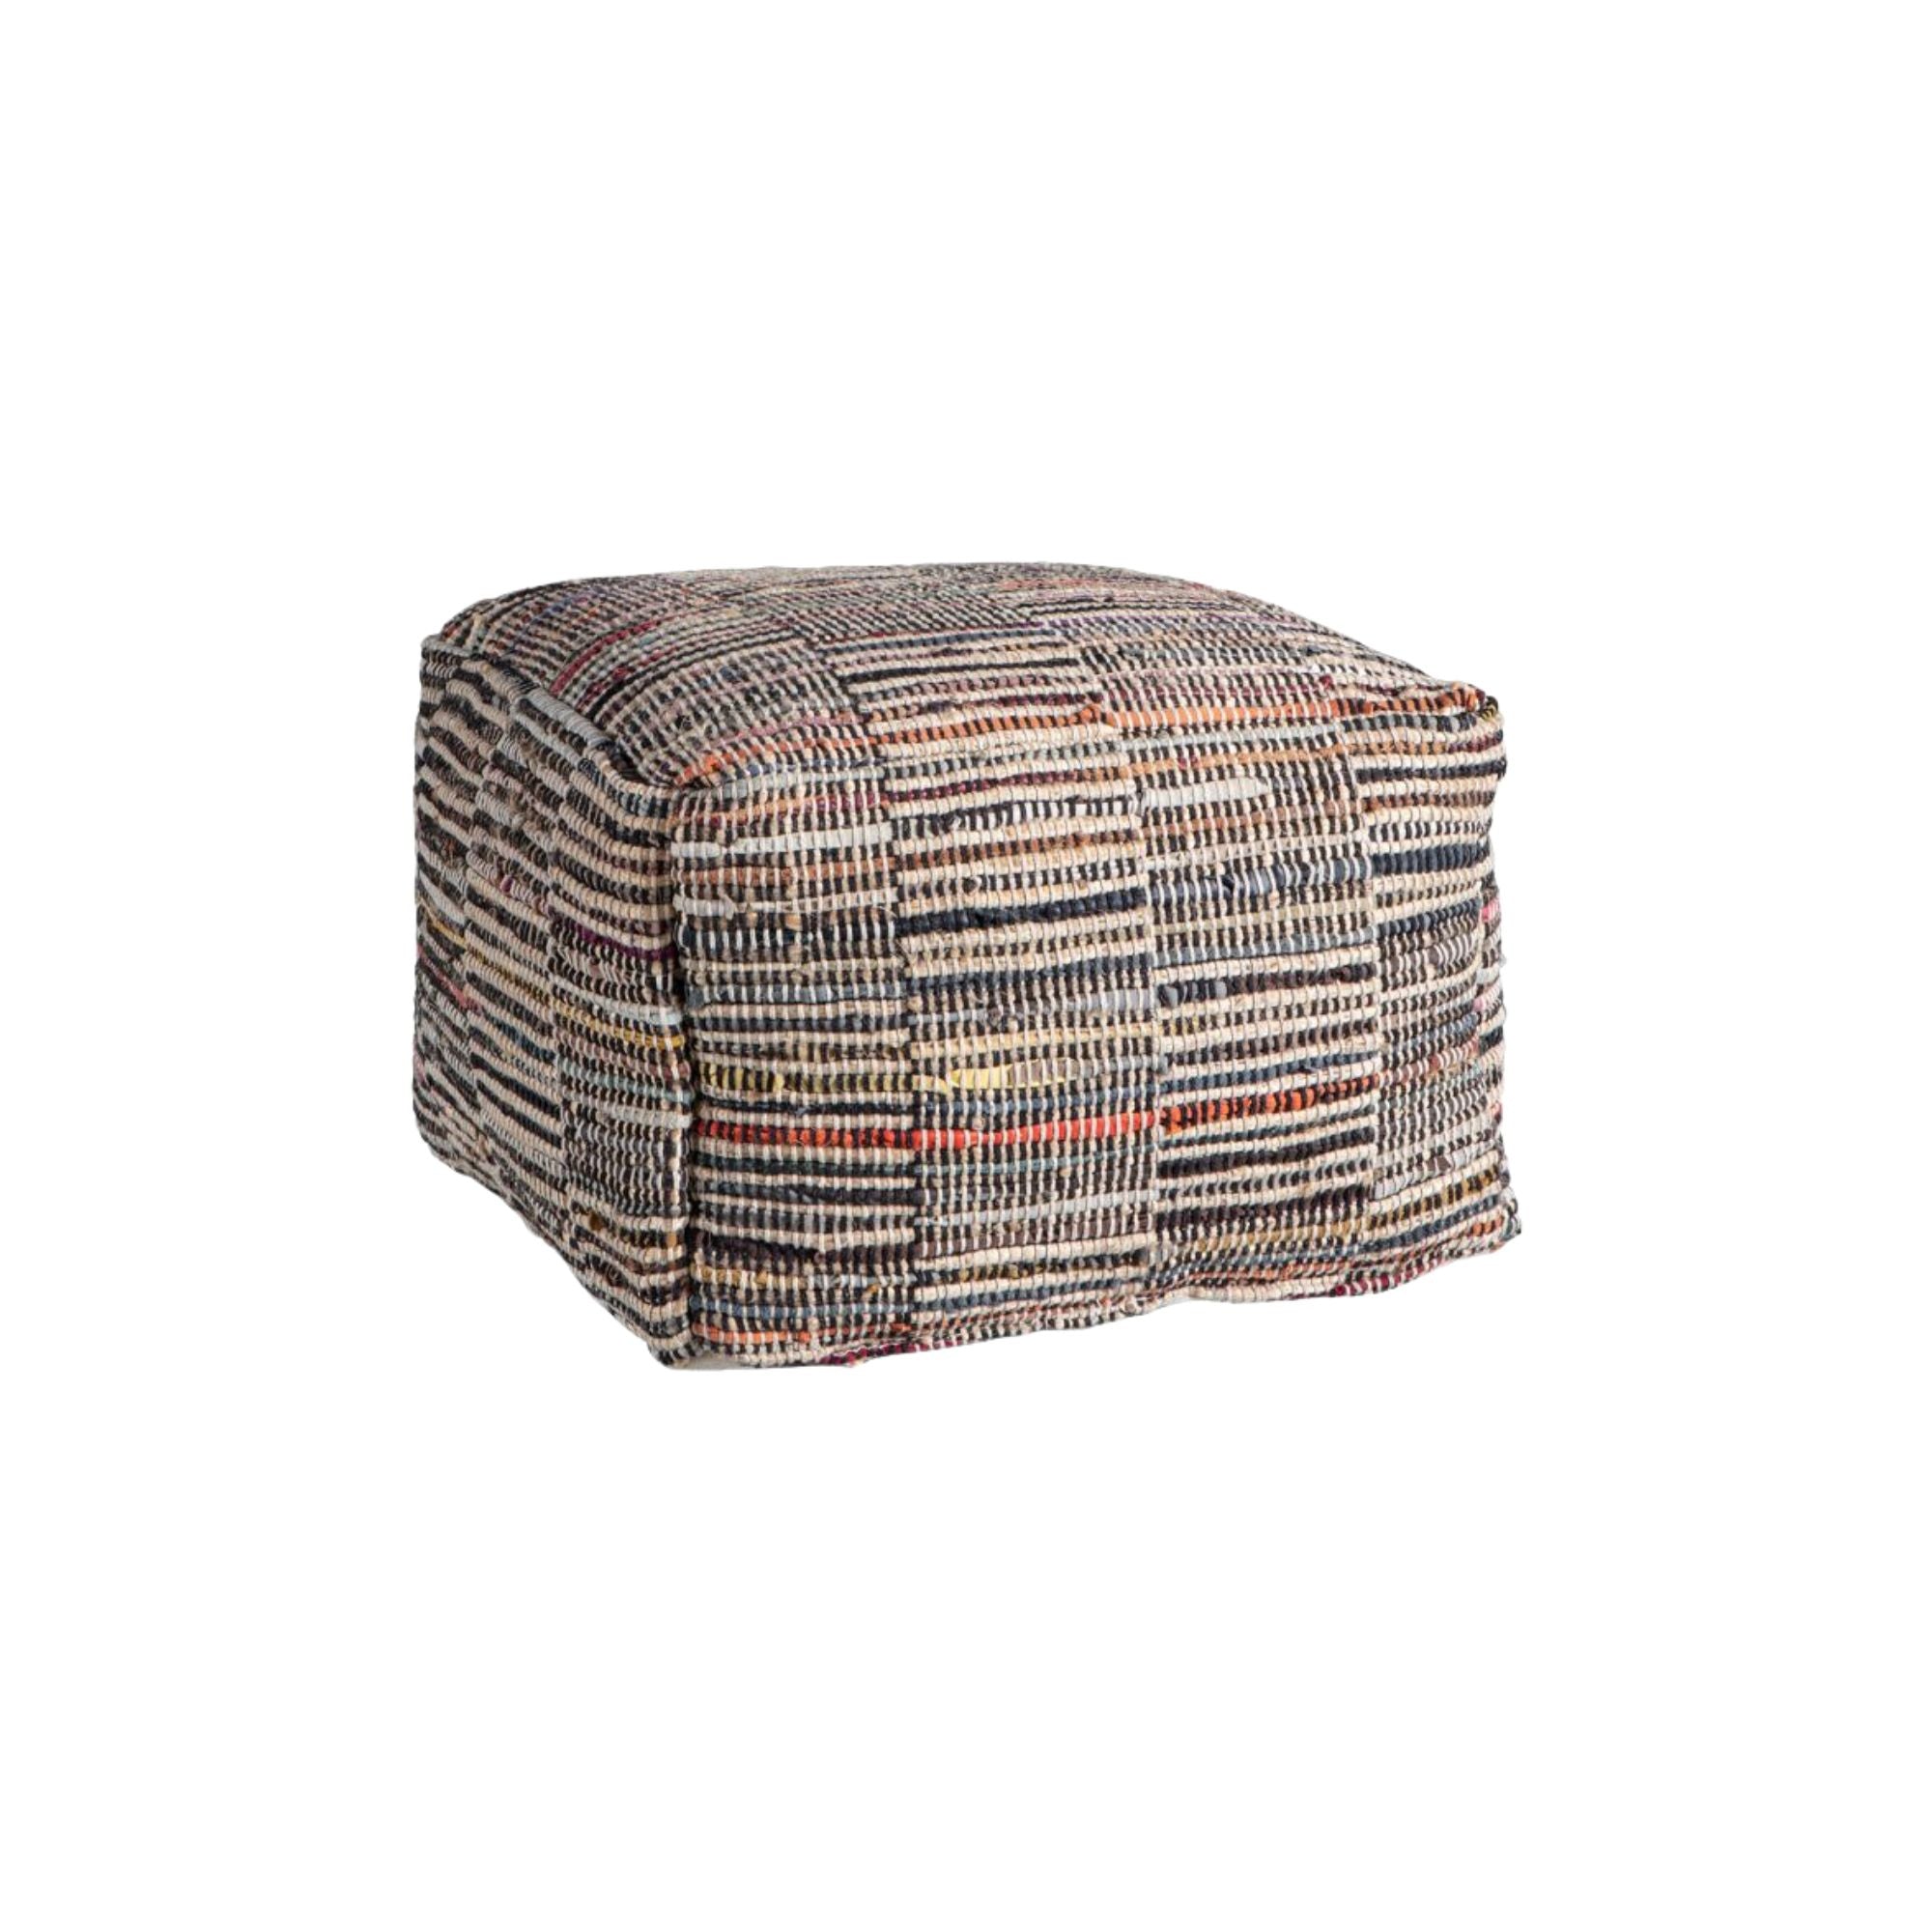 Cadiz pouffe in multi coloured recycled mixed cotton, jute and leather | MalletandPlane.com